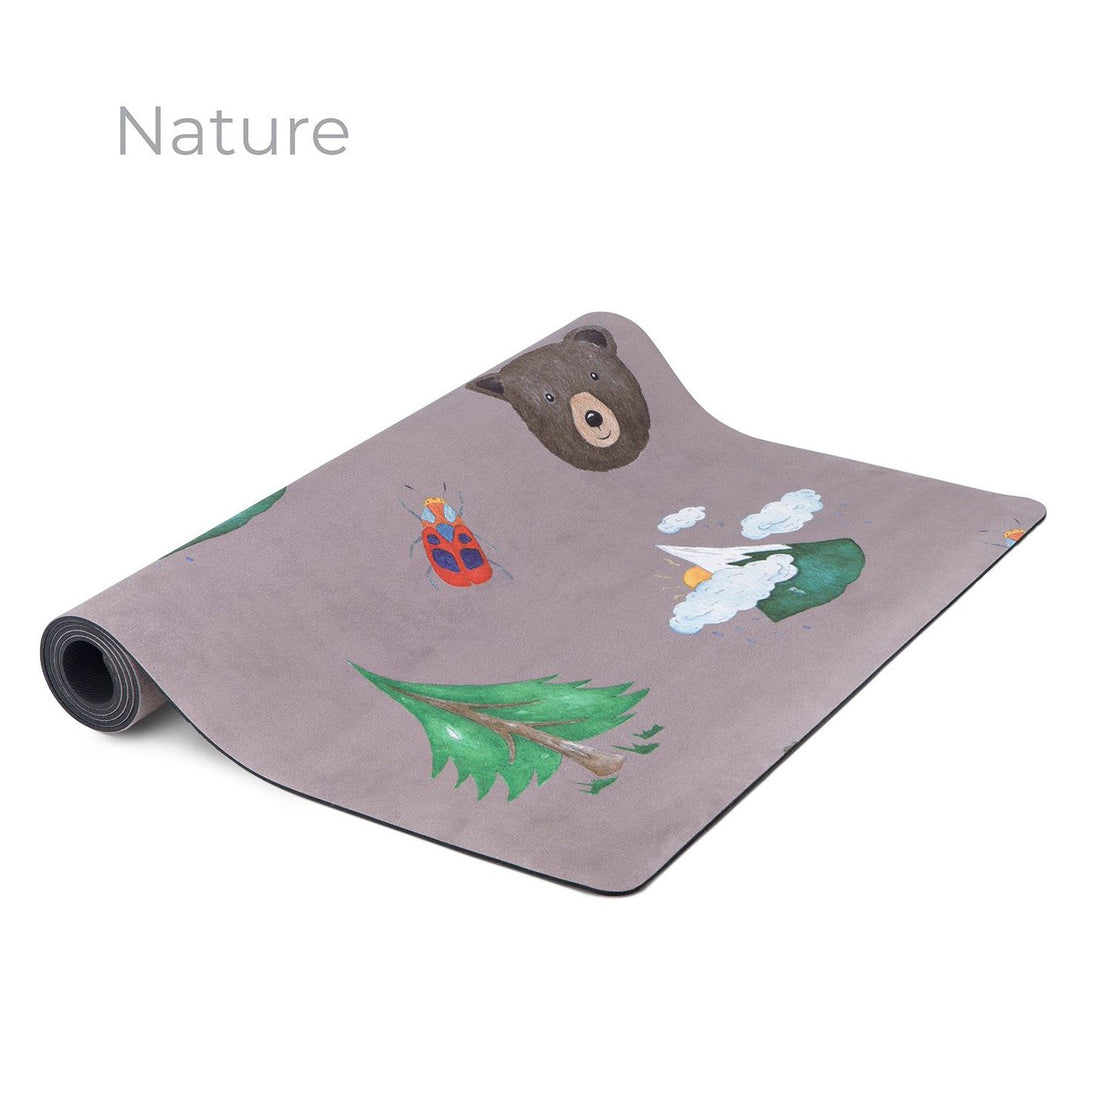 mindful-&-co-kids-luxe-kids-yoga-mats-nature- (1)